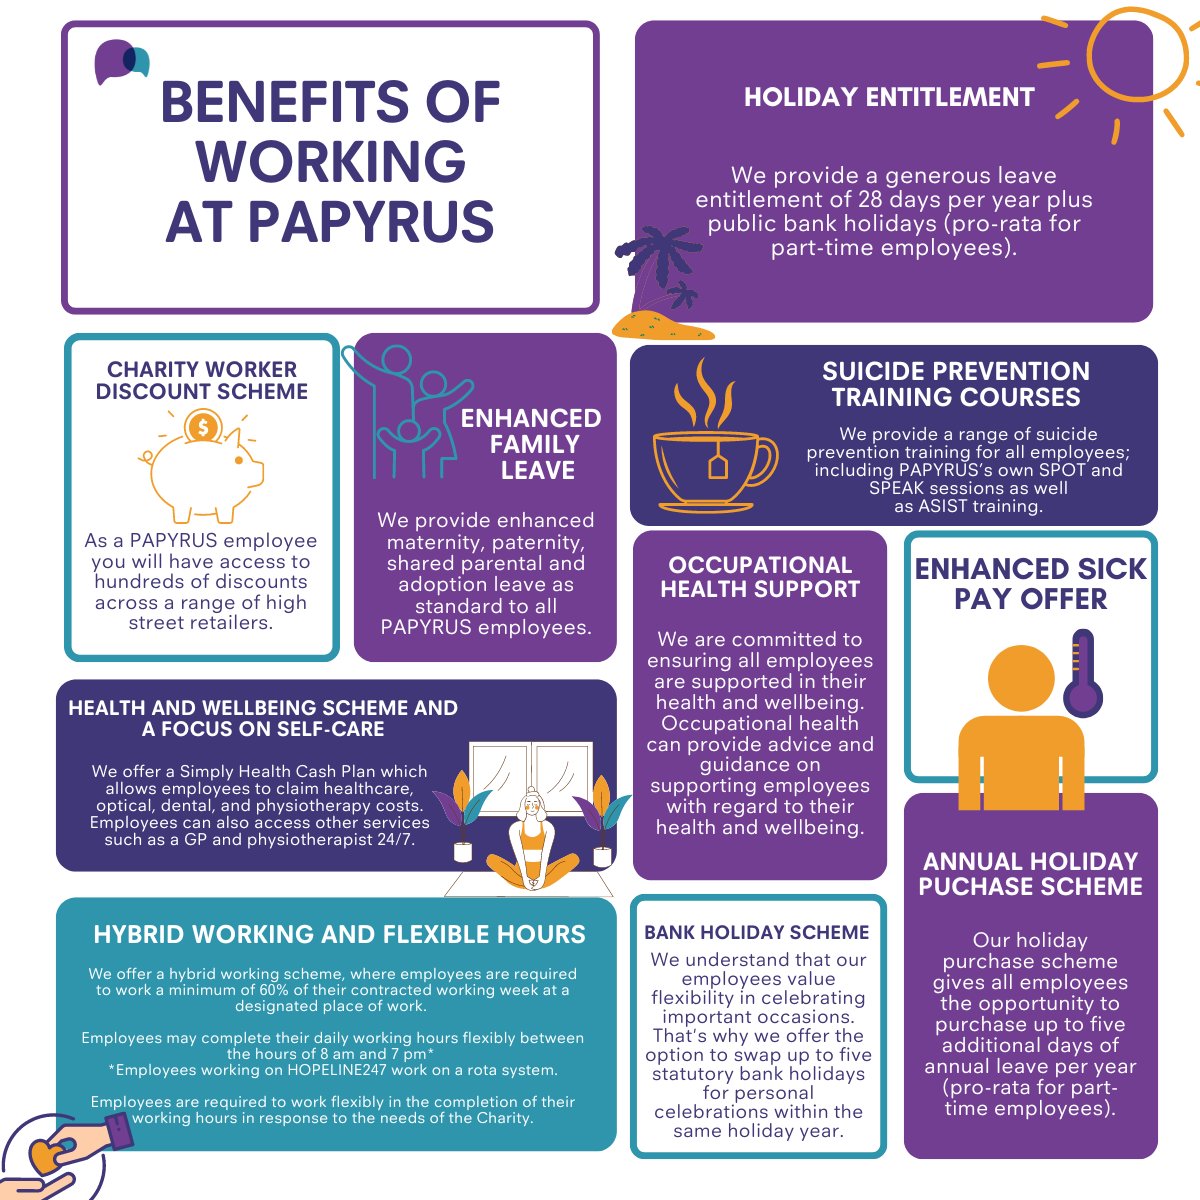 Make your work matter.💜 We really value our team and provide a range of employee benefits to ensure they feel supported. Explore our job opportunities nationwide and start making a difference today: papyrus-uk.org/current-vacanc… #SuicidePrevention #CharityJobs